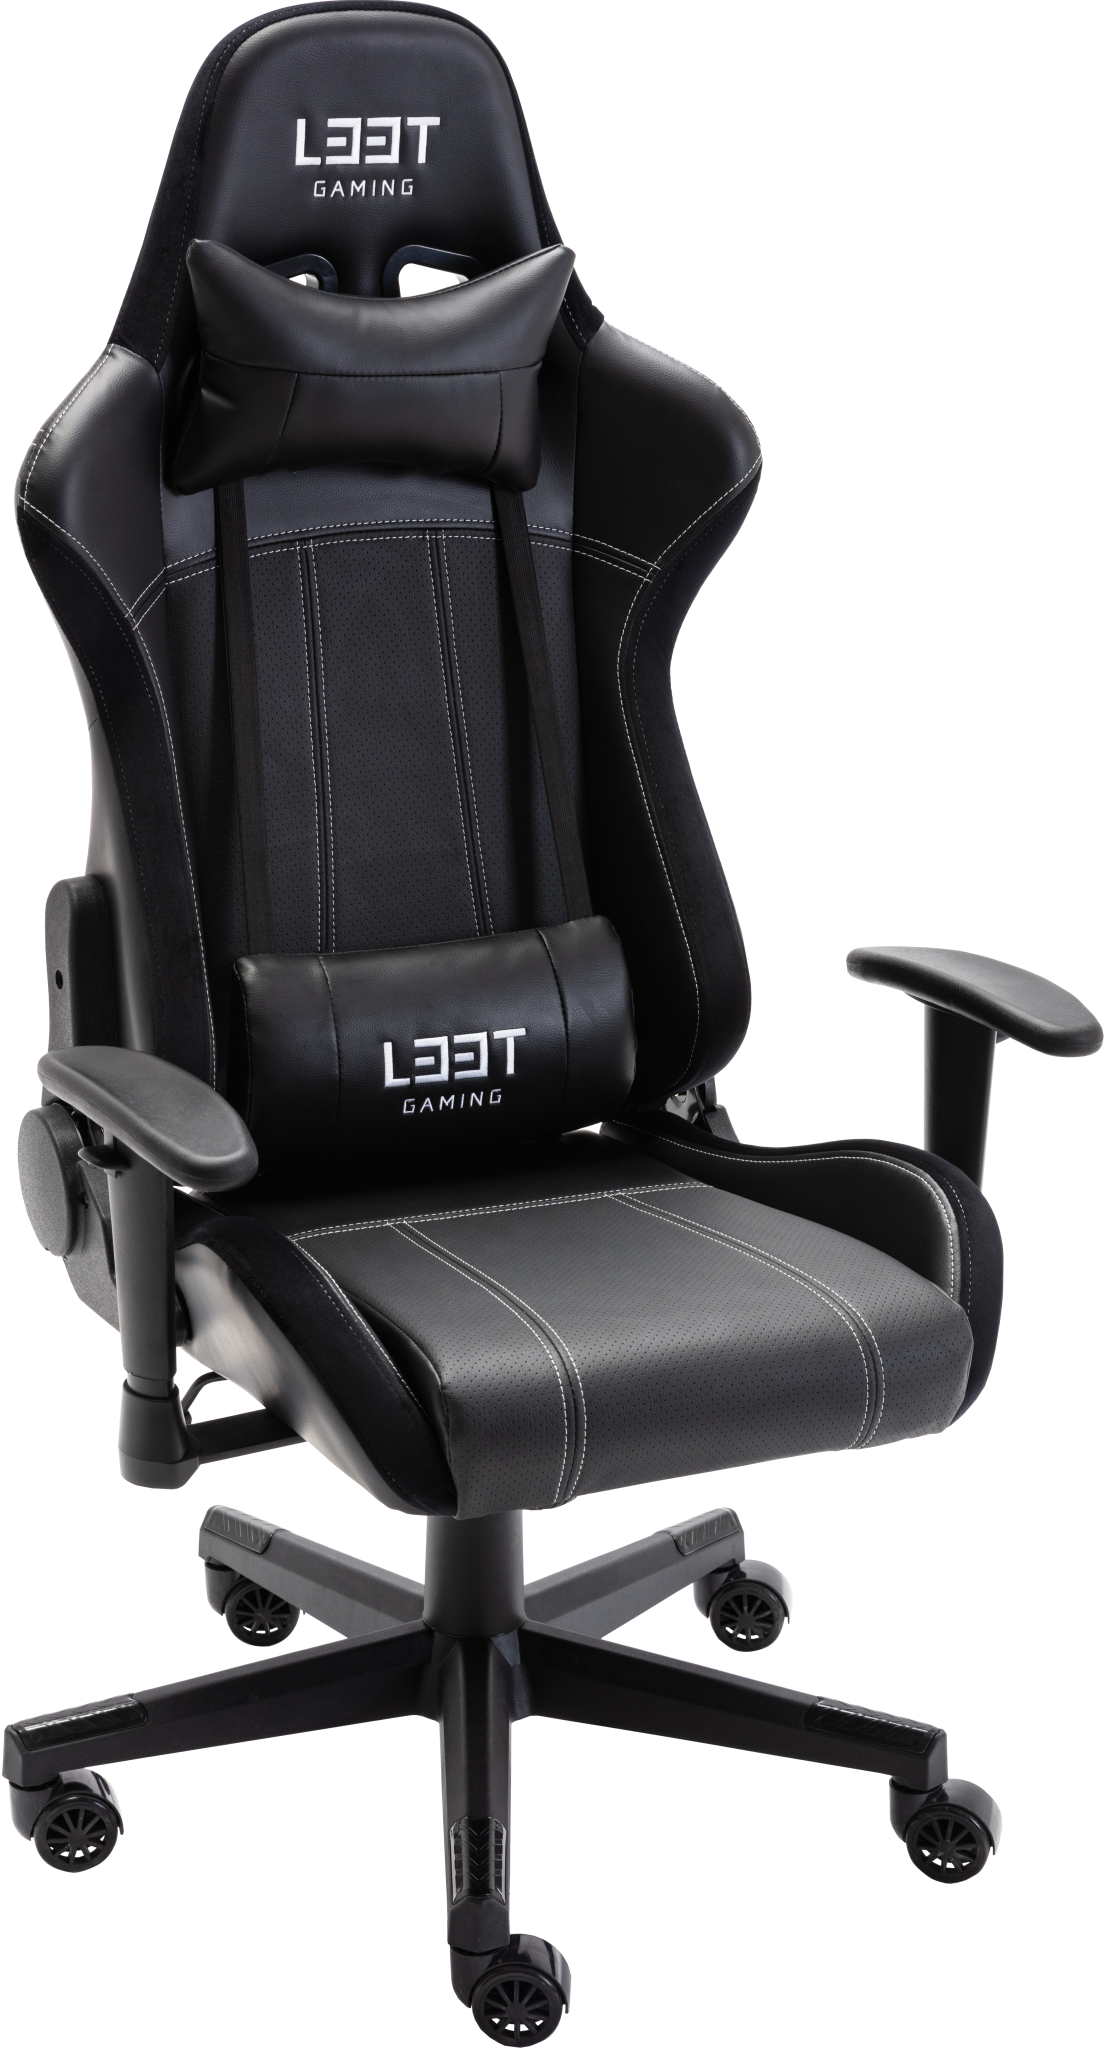 5706470121911 L33T Evolve Gaming Chair - sort PU - Gamingstol Computer & IT,Gaming,Gaming stole 74600009200 BF-2021